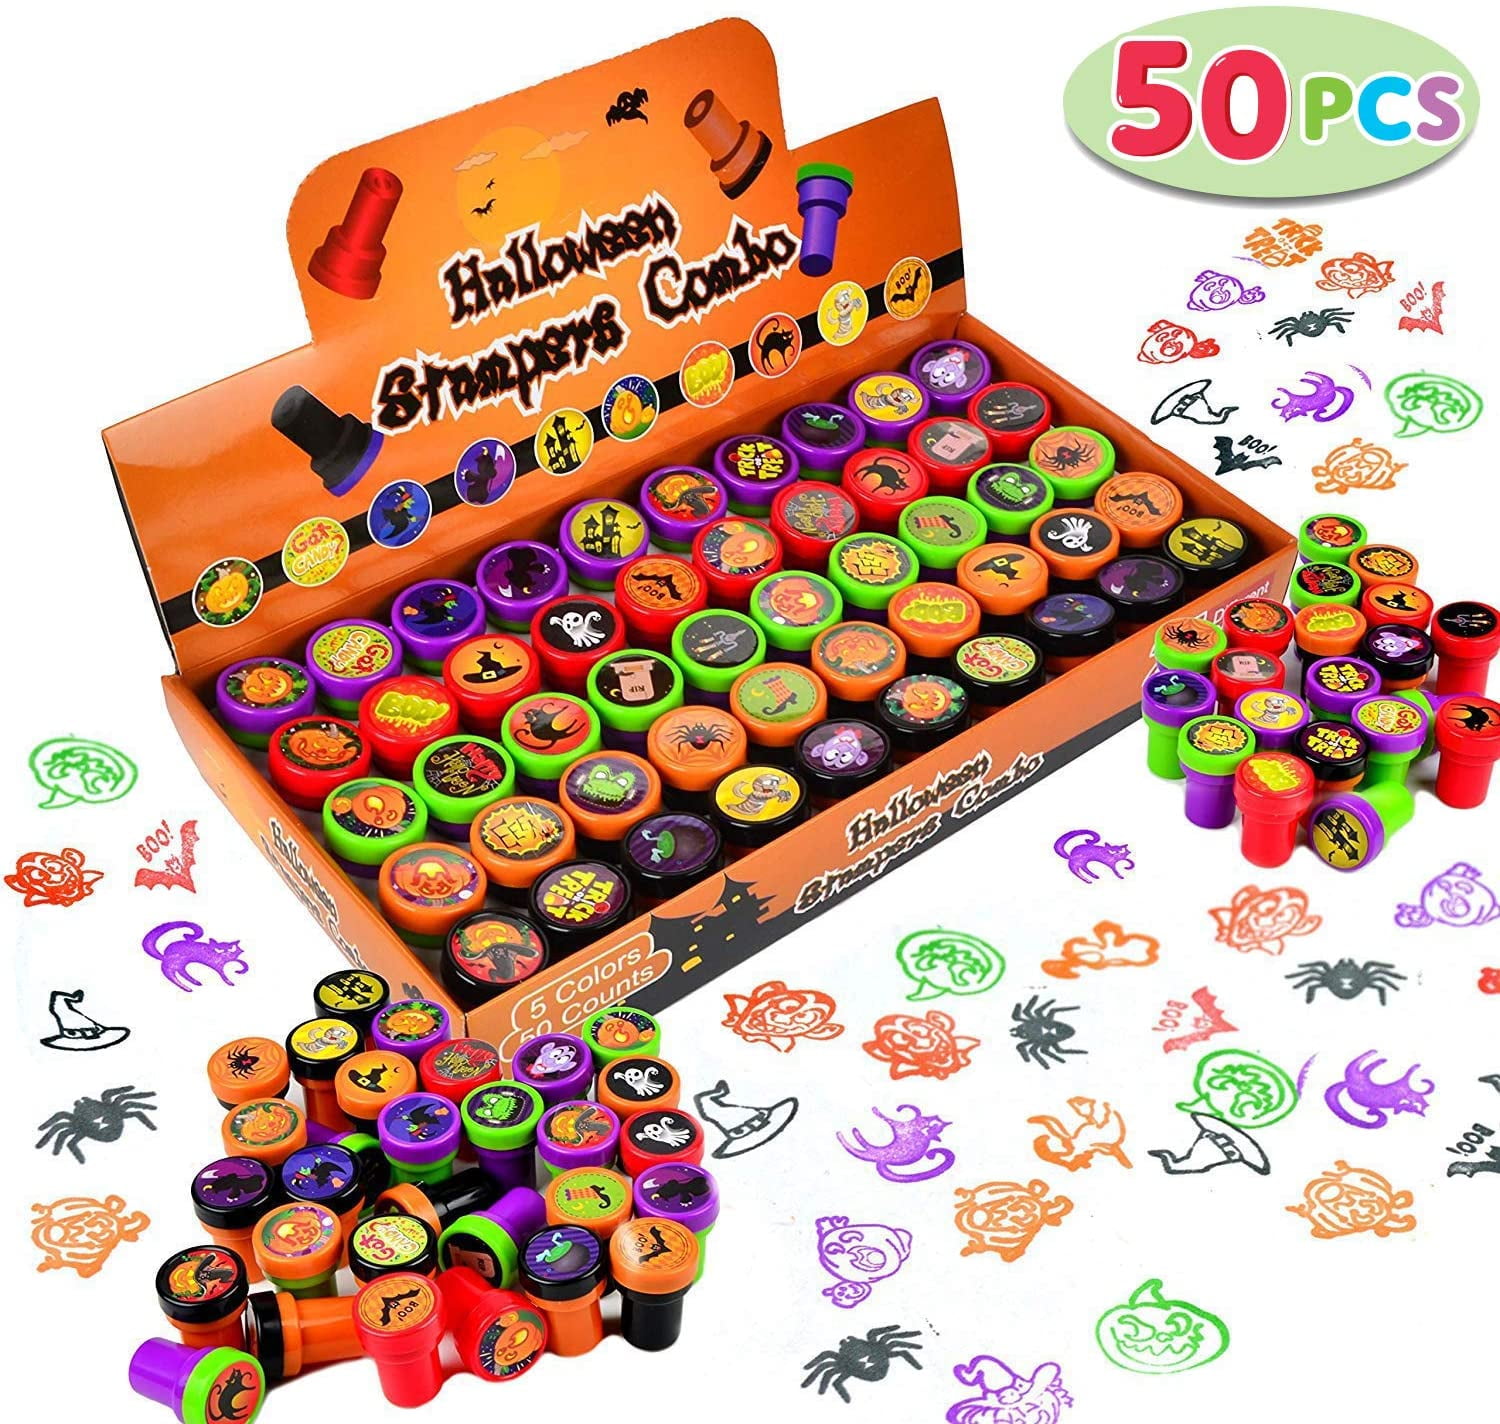 Stamps Rubber Duck in Trick or Treat Bags Stickers Erasers 156 Pieces Halloween Toys Novelty Assortment for Halloween Party Favors Assorted Halloween Themed Stationery Kids Gift Set Trick Treat Price Party Favor Toy Including Halloween Pencils